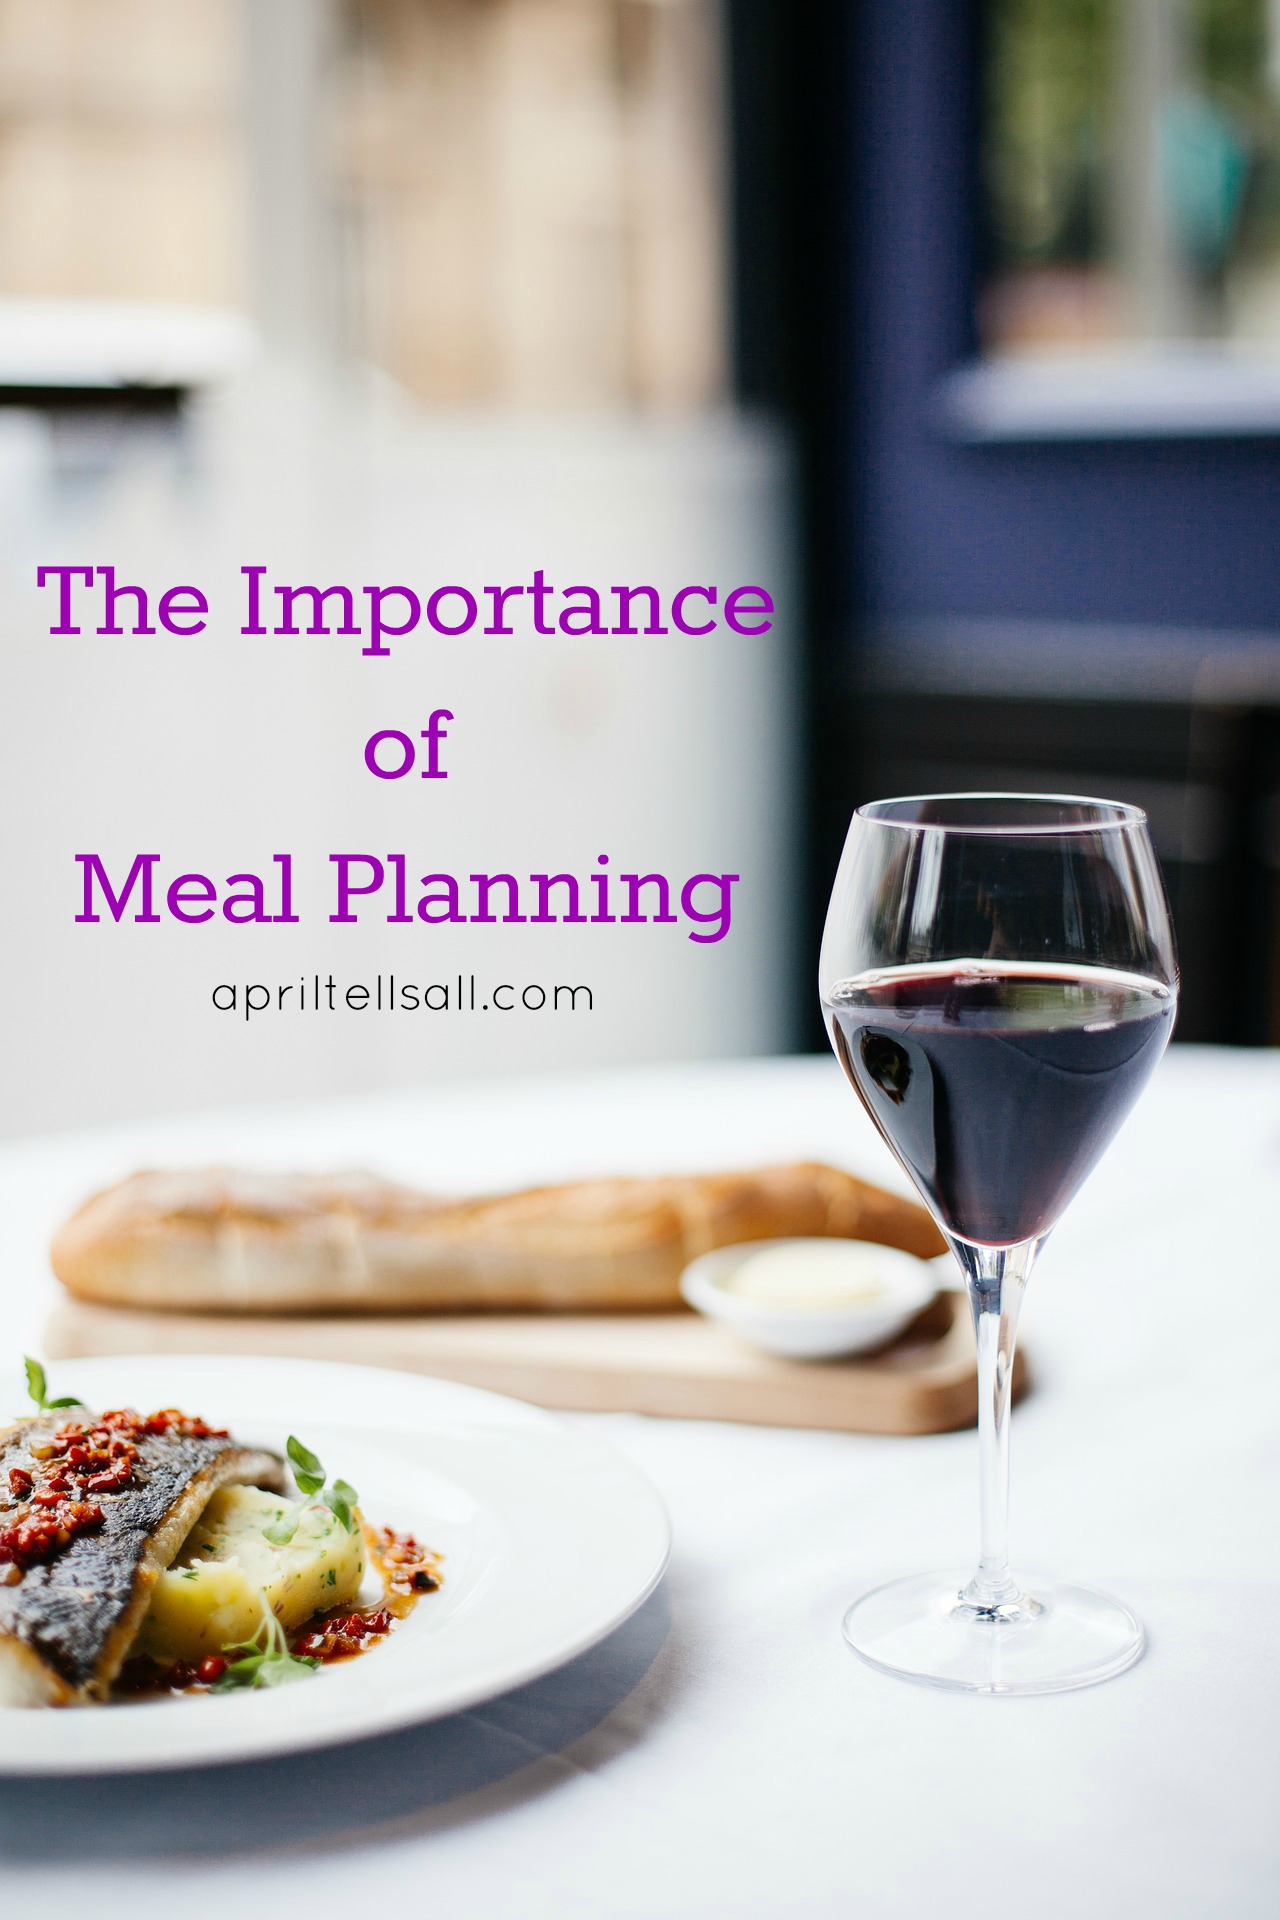 The Importance of Meal Planning